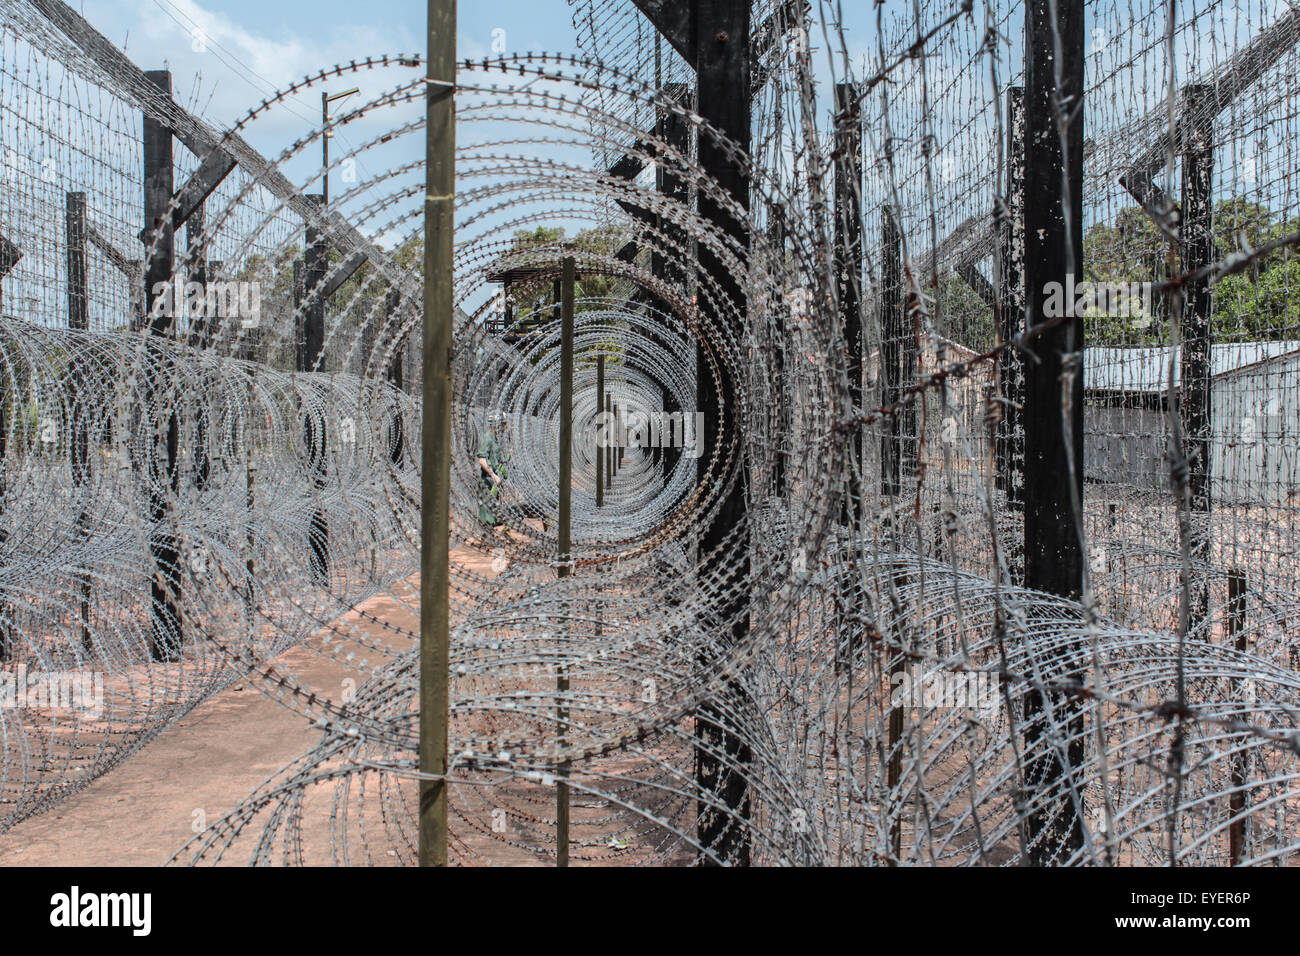 30,000+ Barbed Wire Fence Pictures